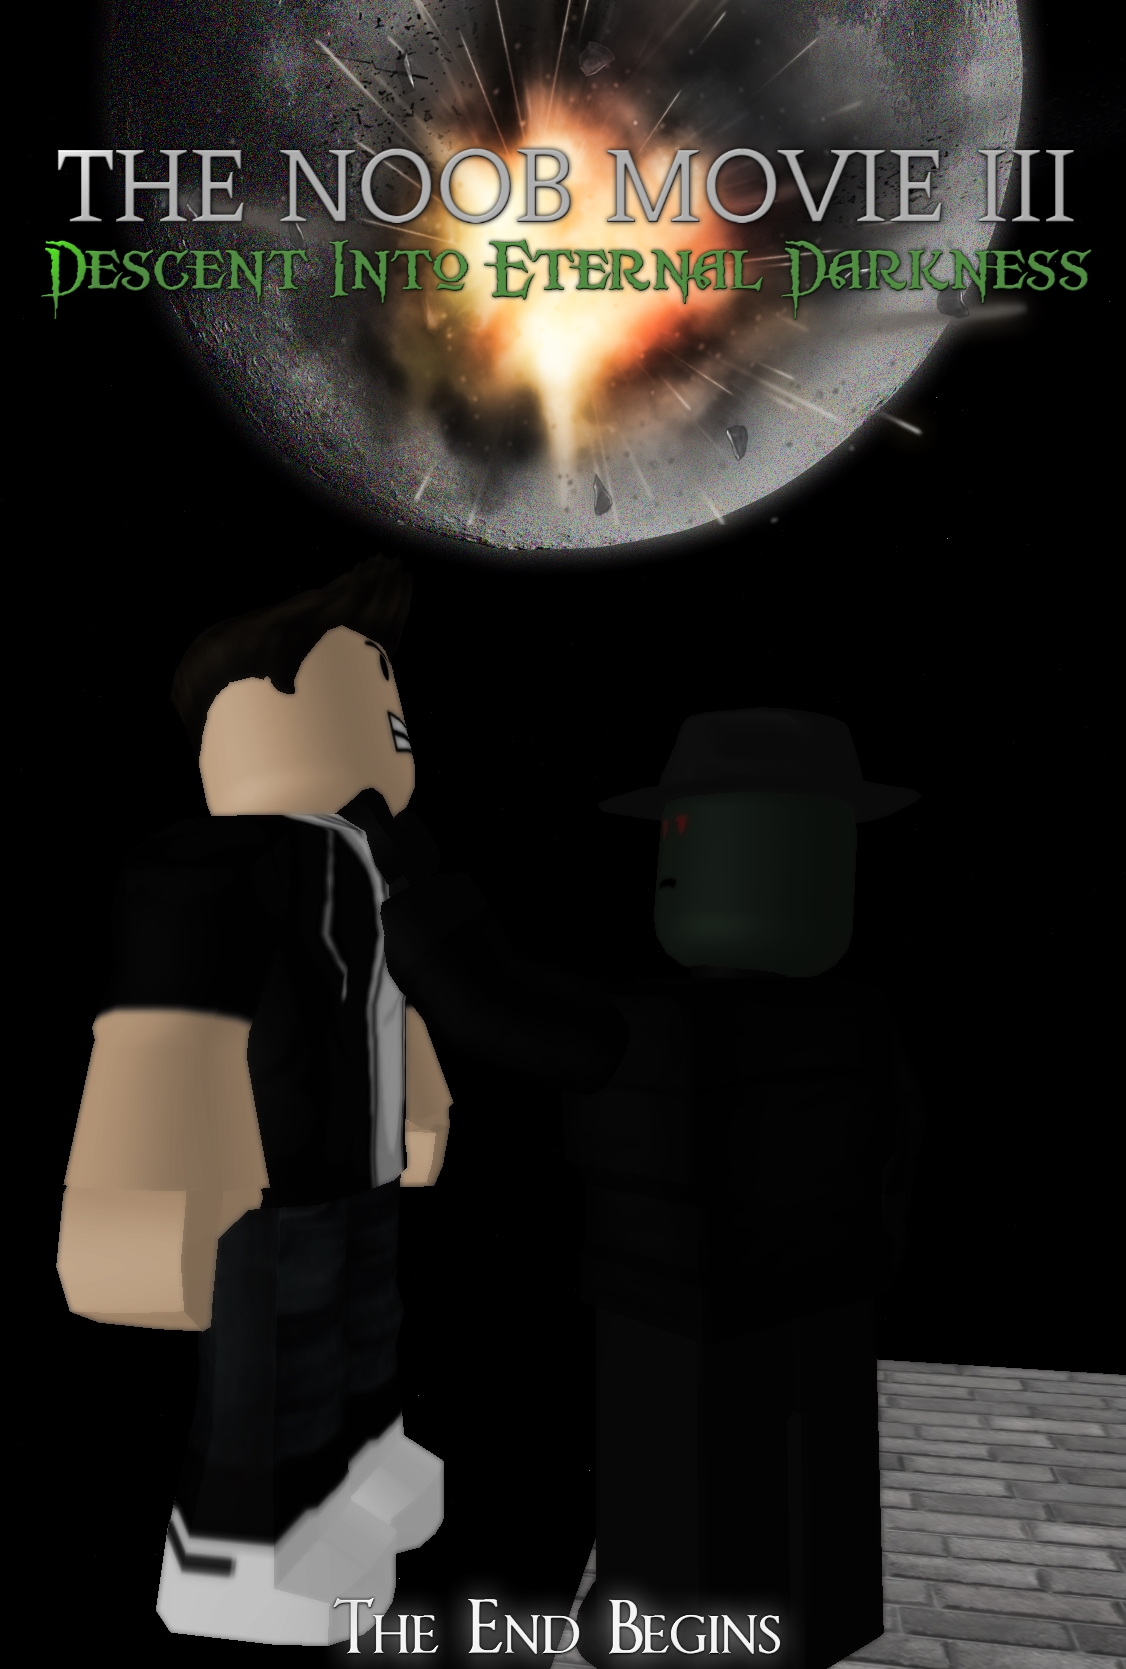 The Noob Movie Iii Descent Into Eternal Darkness Roblox Film Wiki Fandom Powered By Wikia - the noob movie v final adventure roblox film wiki